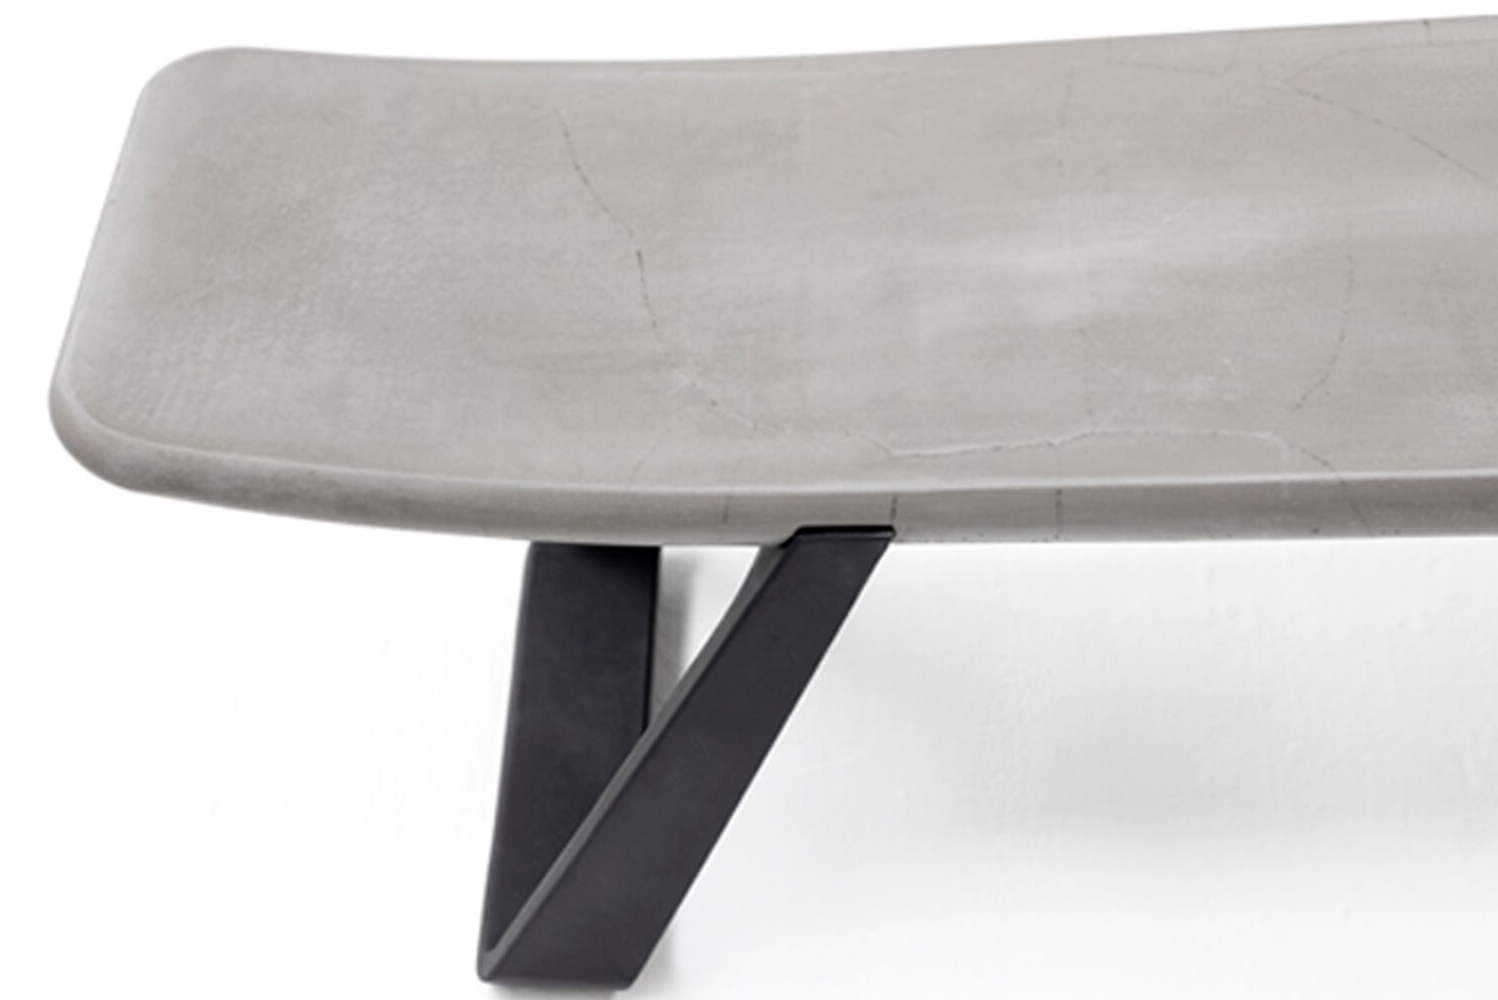 Toronto-based furniture manufacturer Nienkmper launched the Perplex bench